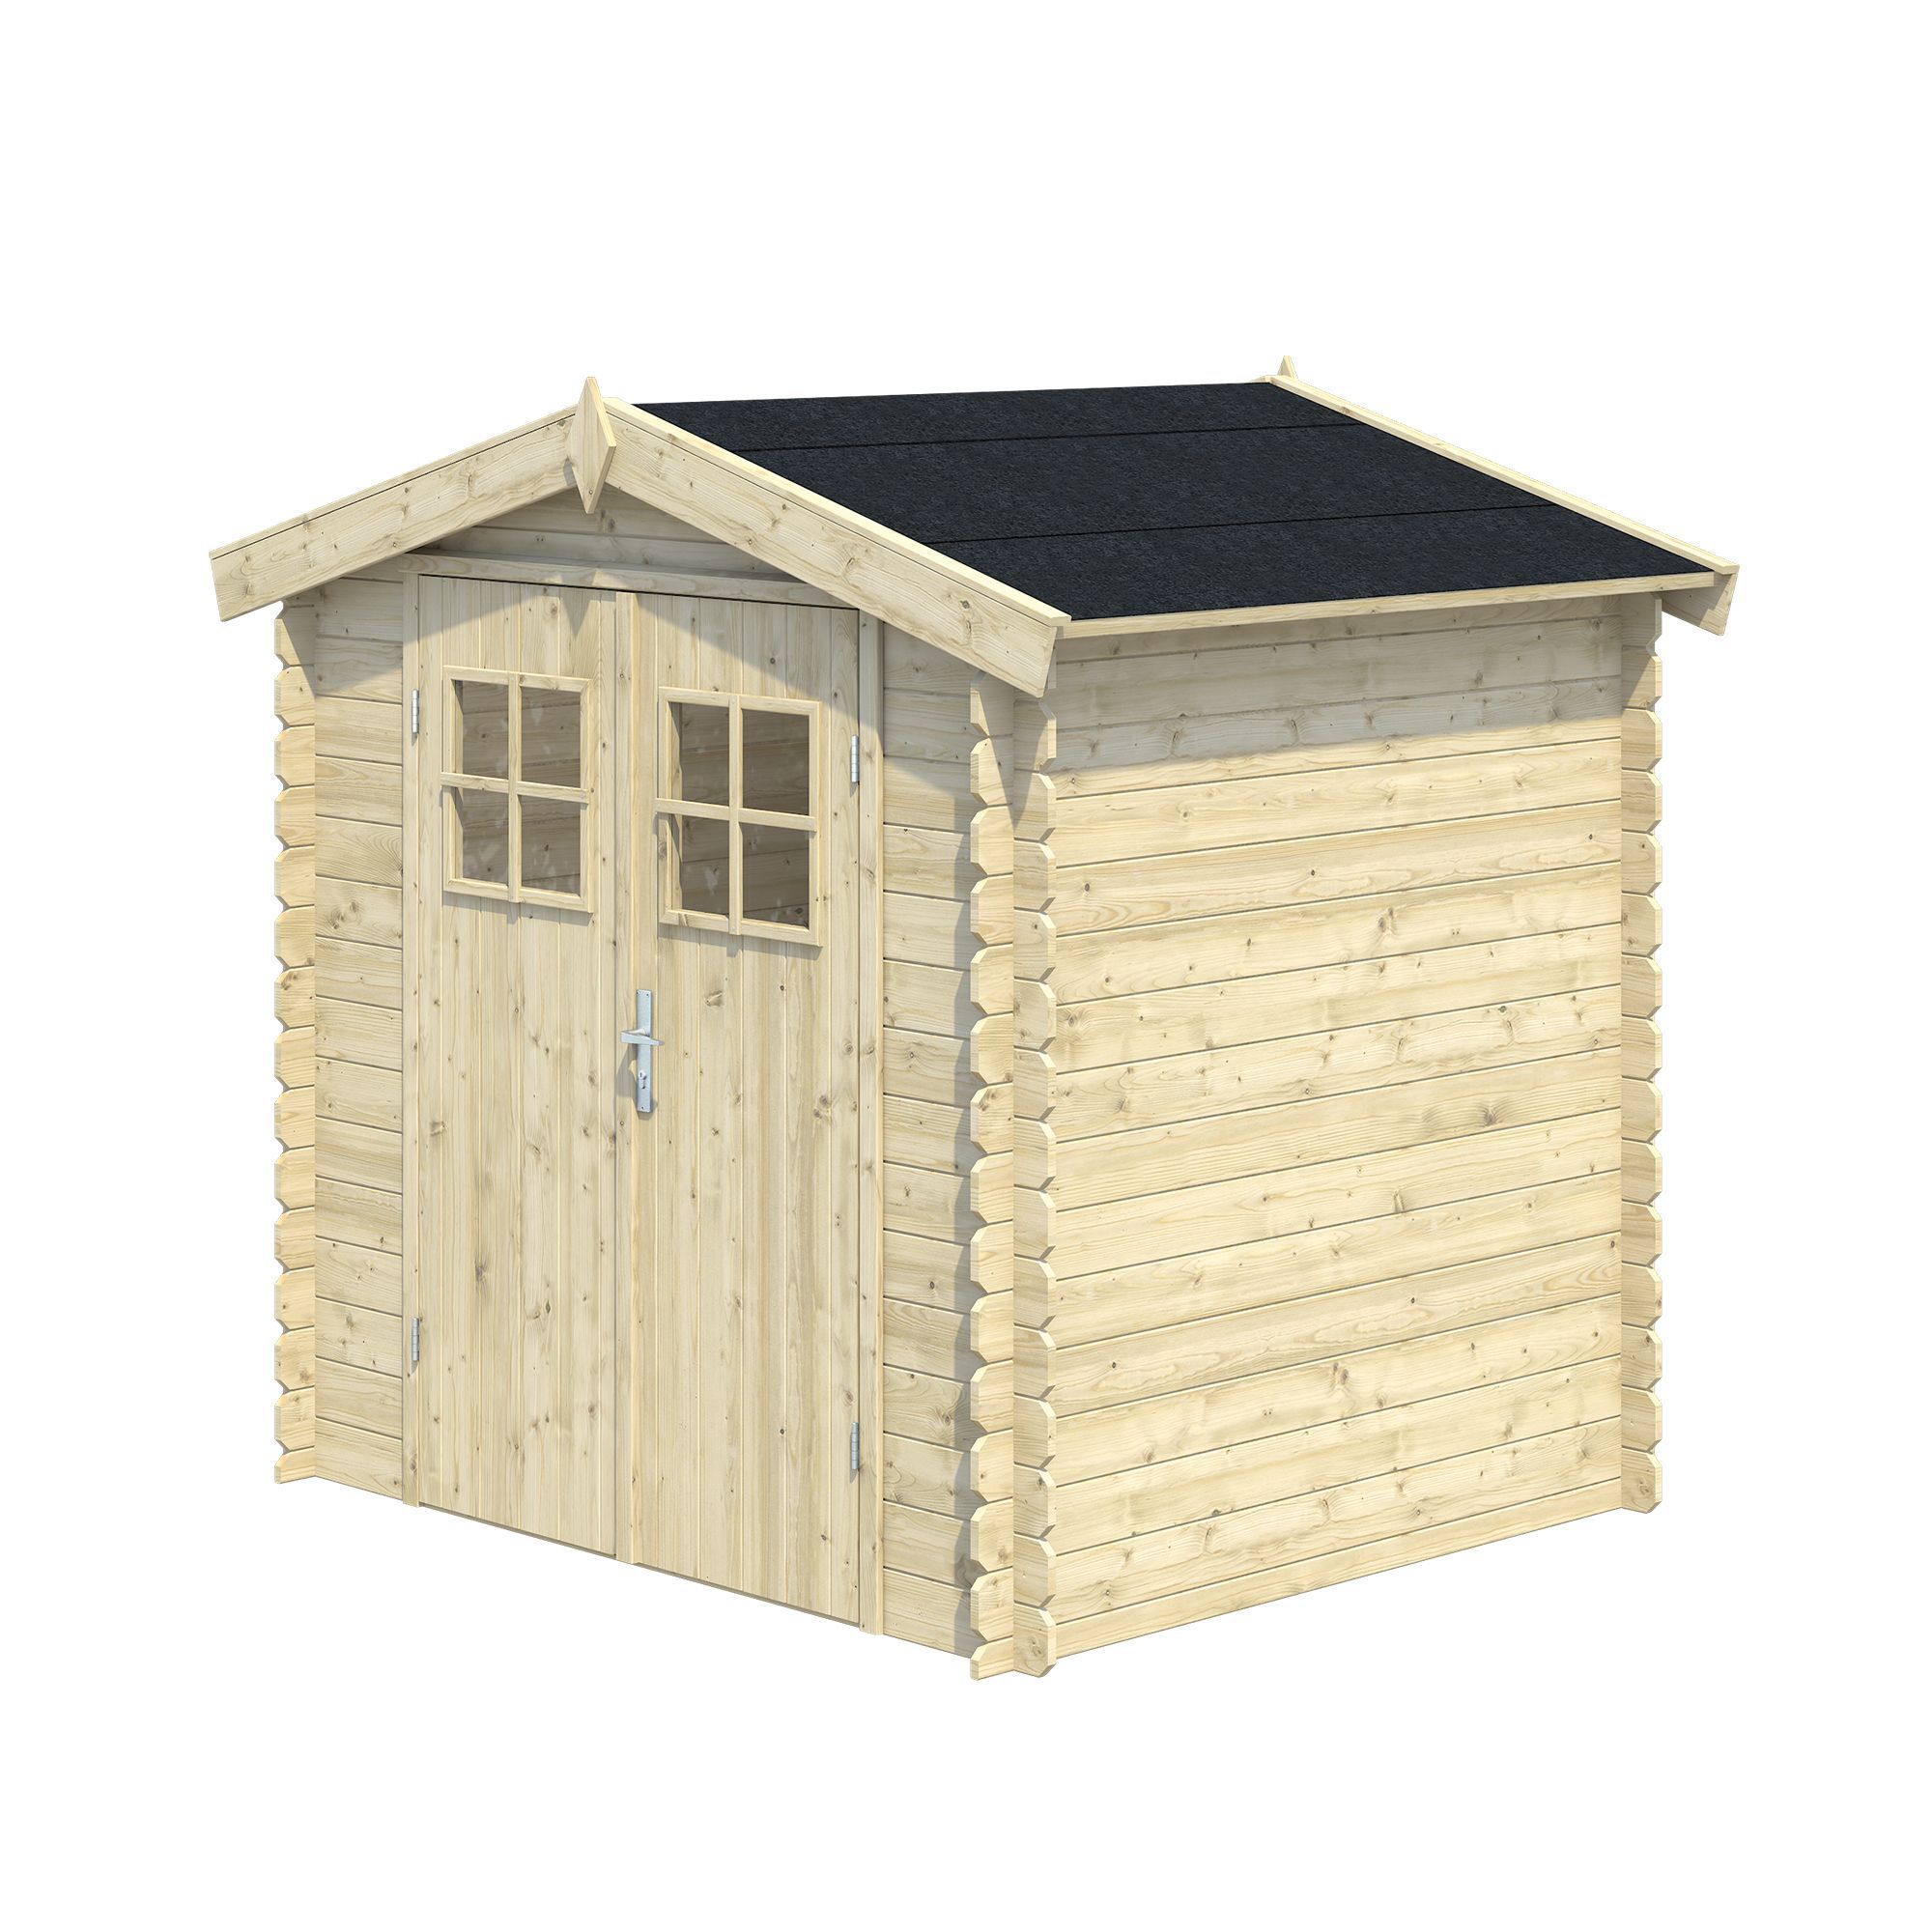 Blooma Mokau 6x5 Apex Tongue & groove Wooden Shed